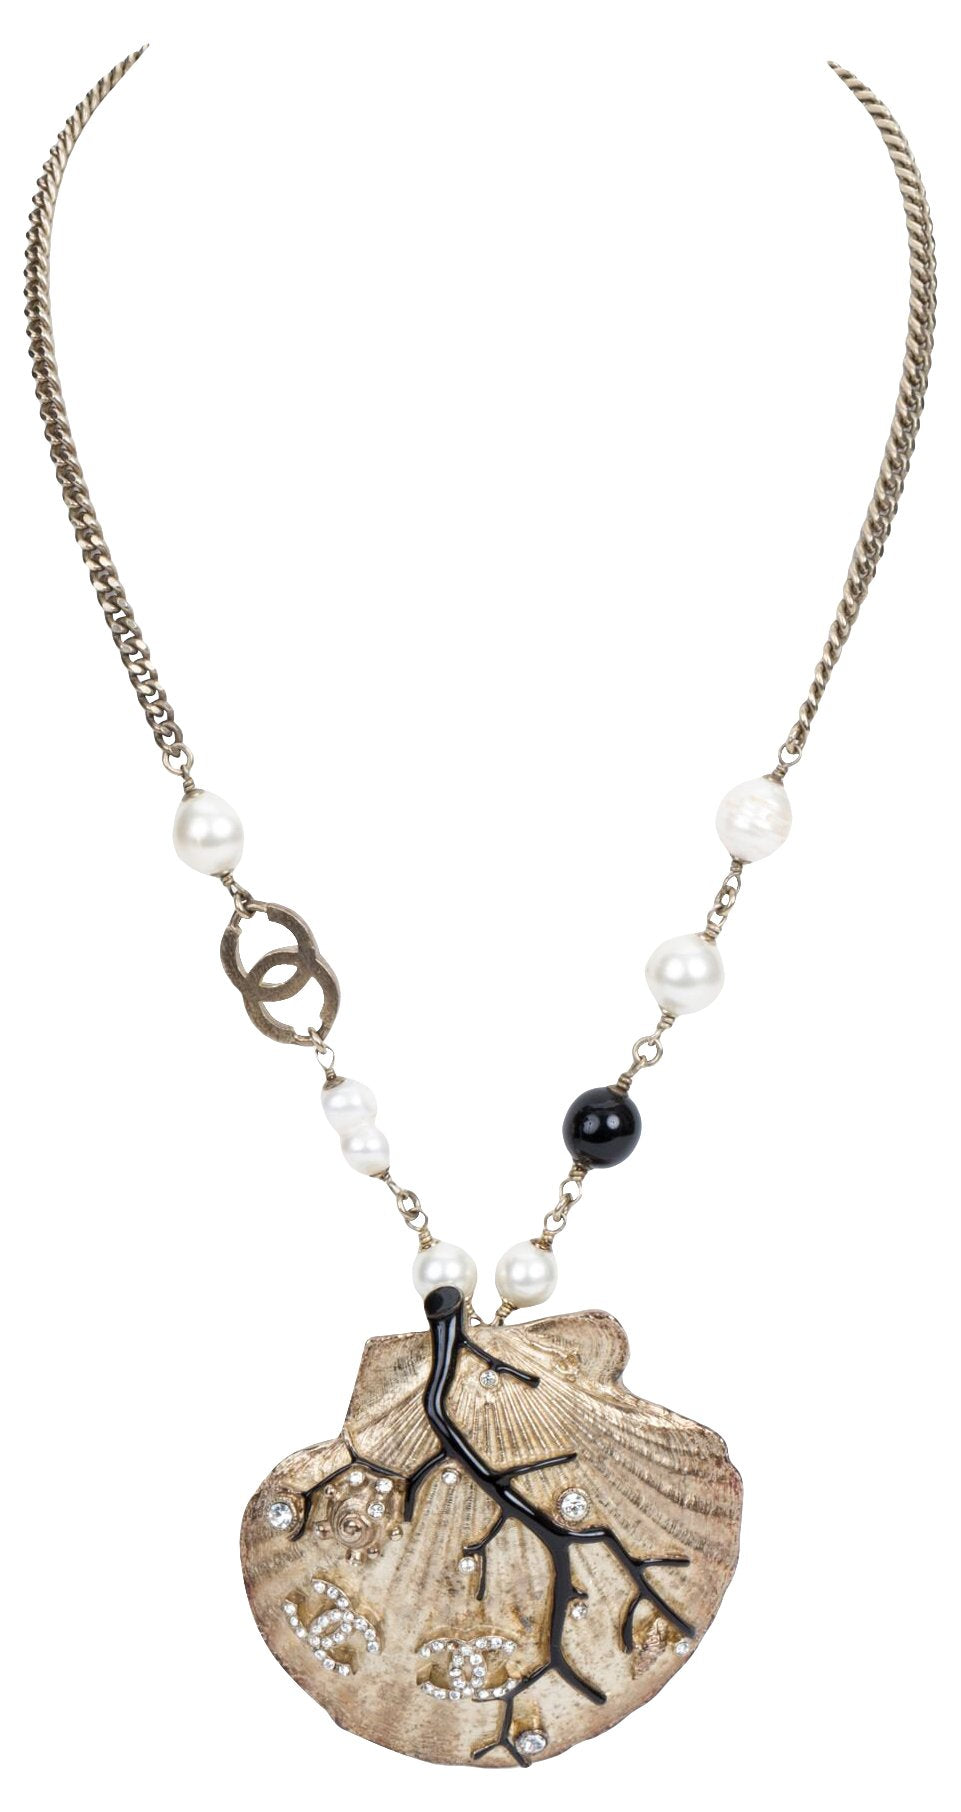 Chanel 80s Hammered Magnifier Necklace